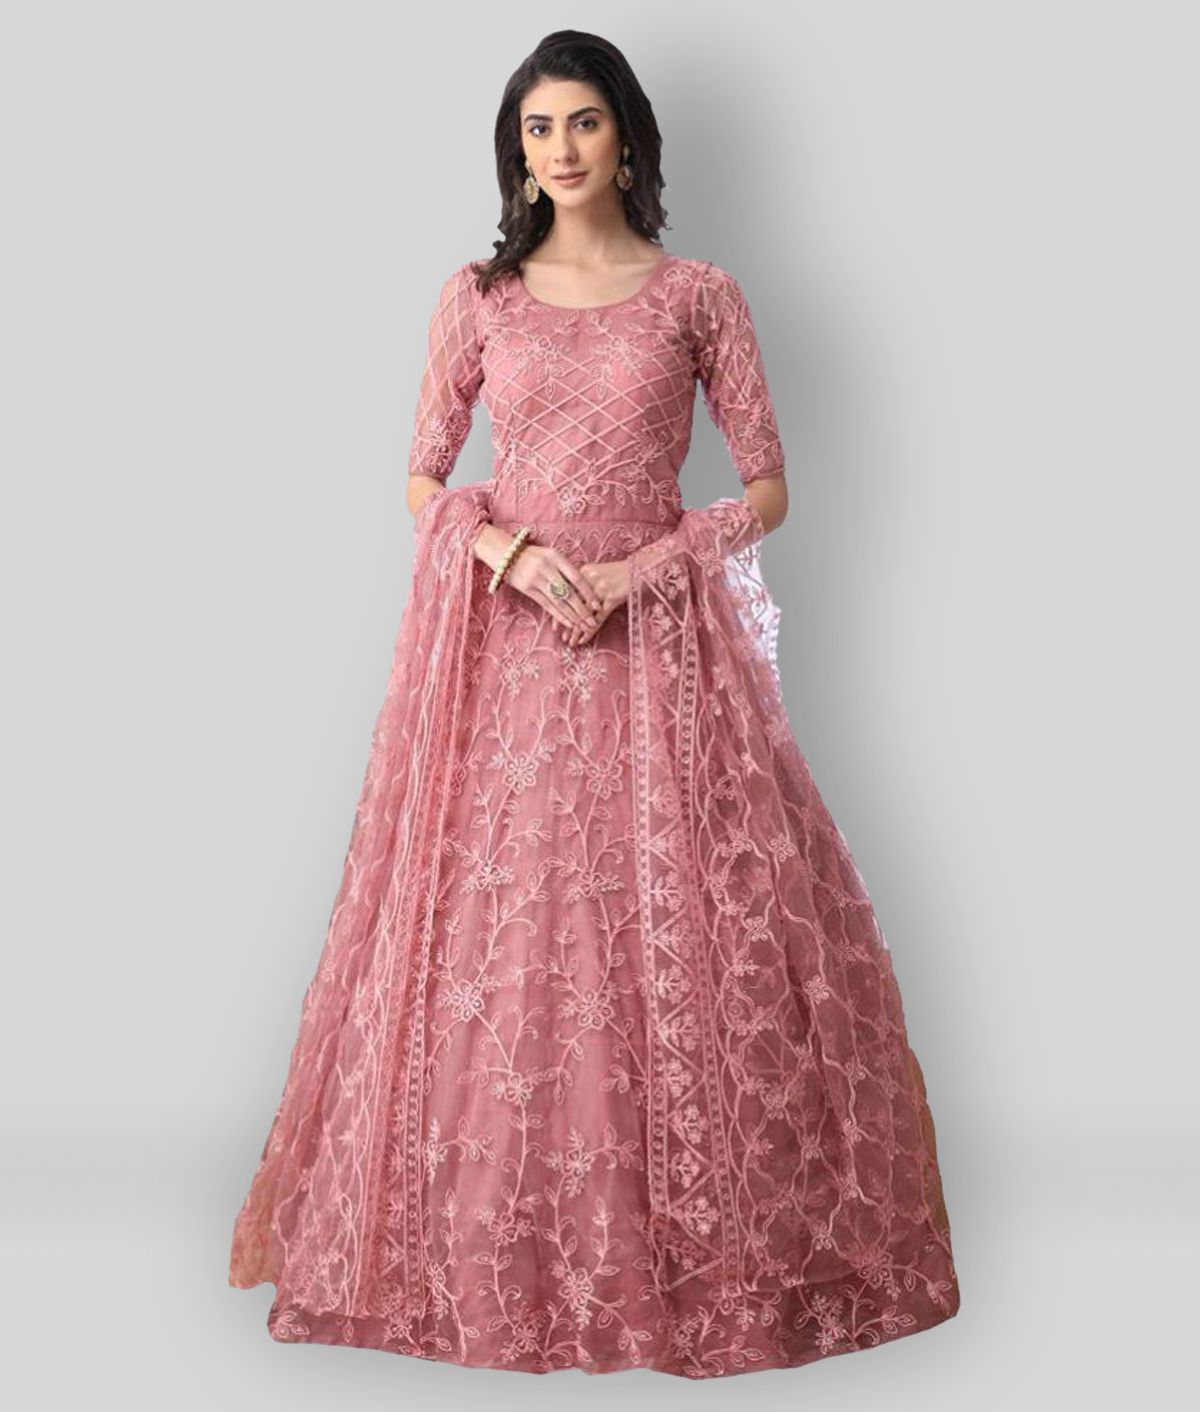 GD TRENDZ - Pink Anarkali Net Women's Semi Stitched Ethnic Gown ( Pack of 1 )